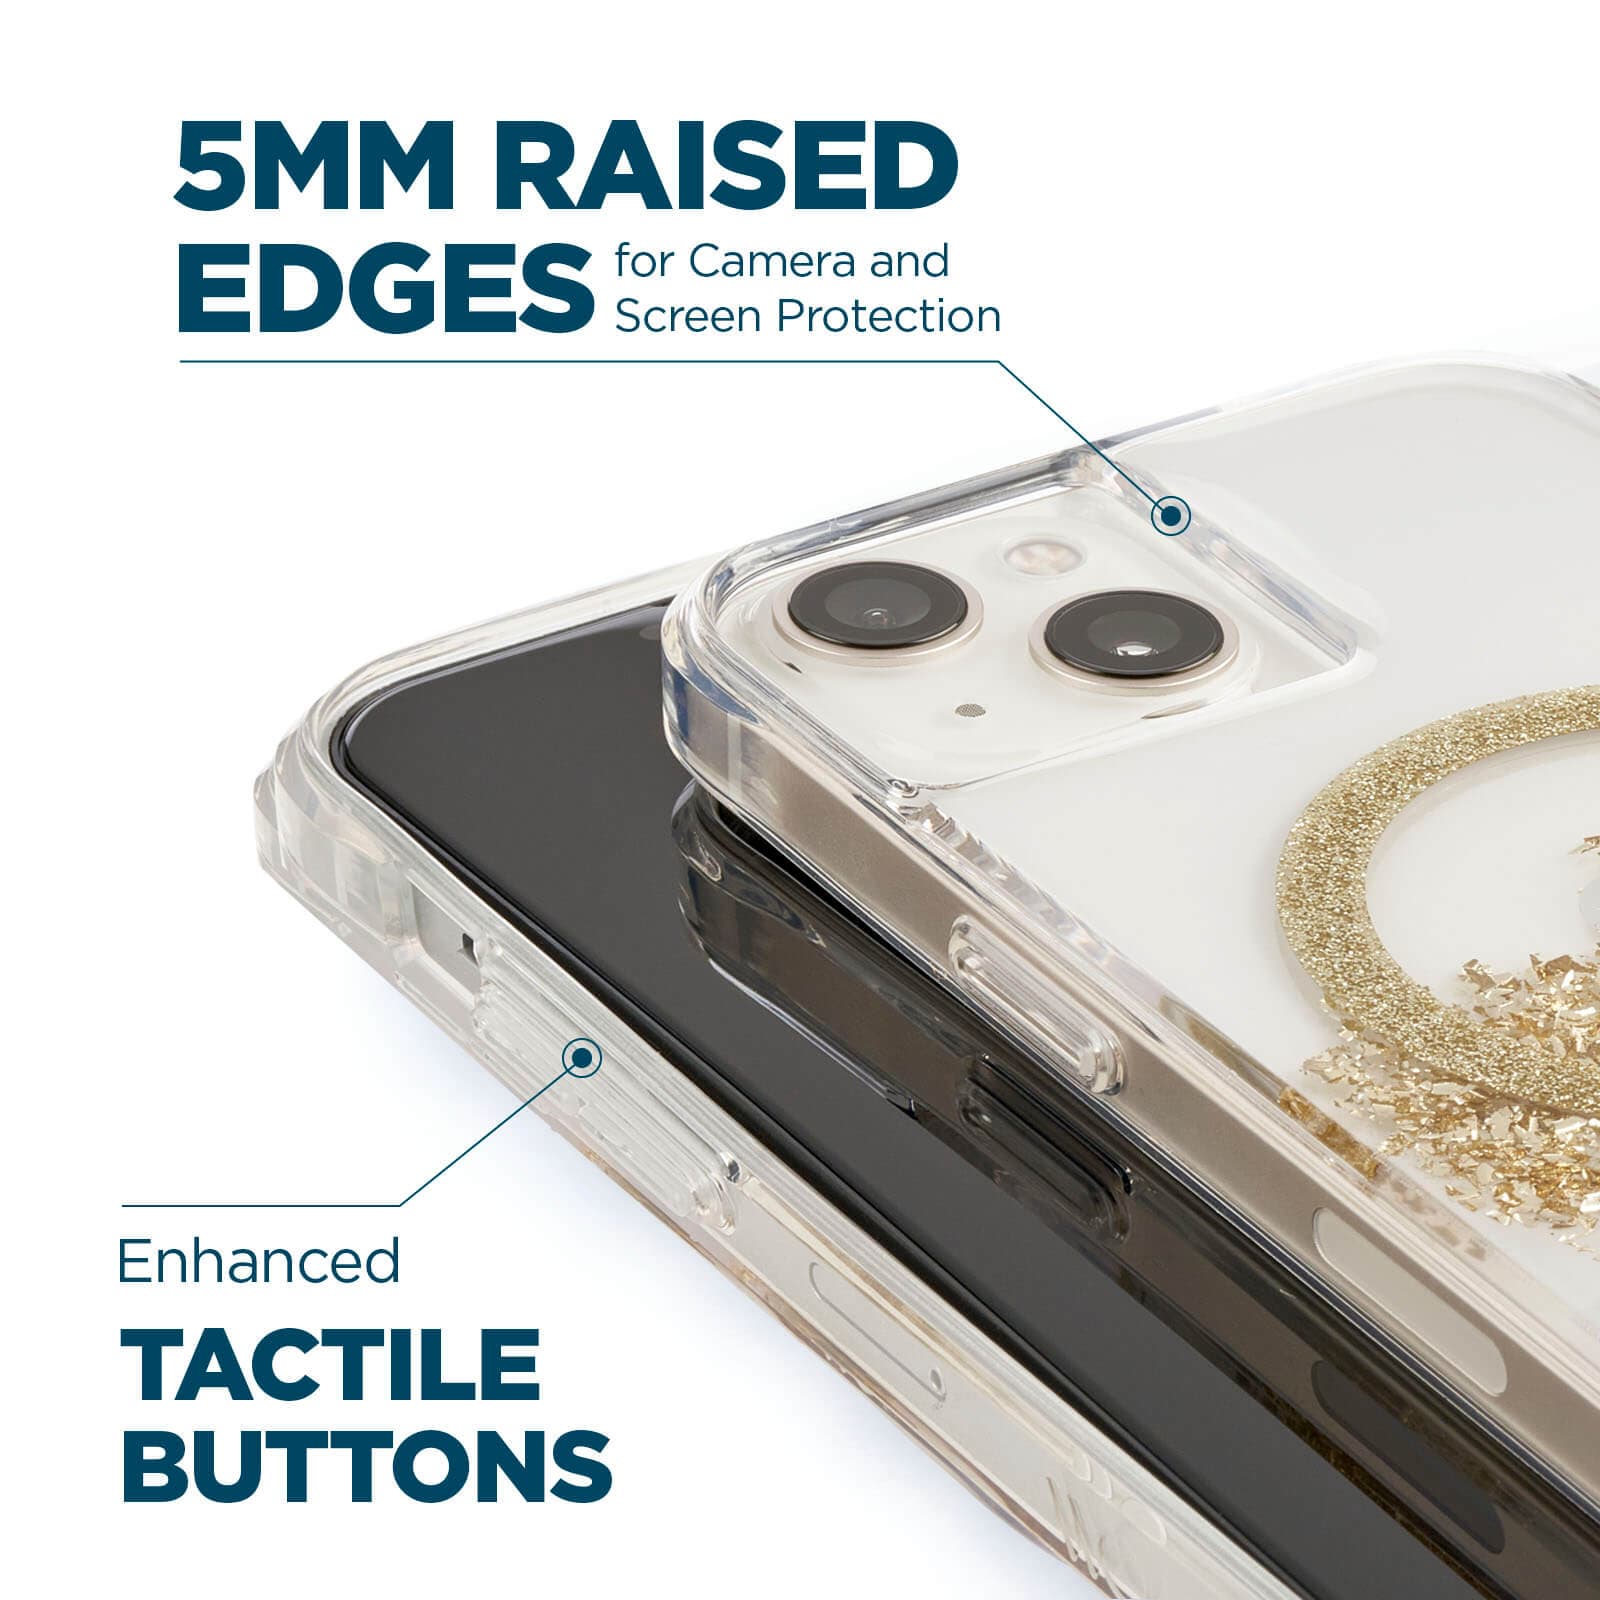 5mm raised edges for camera and screen protection. Enhanced tactile buttons. color::Karat Marble